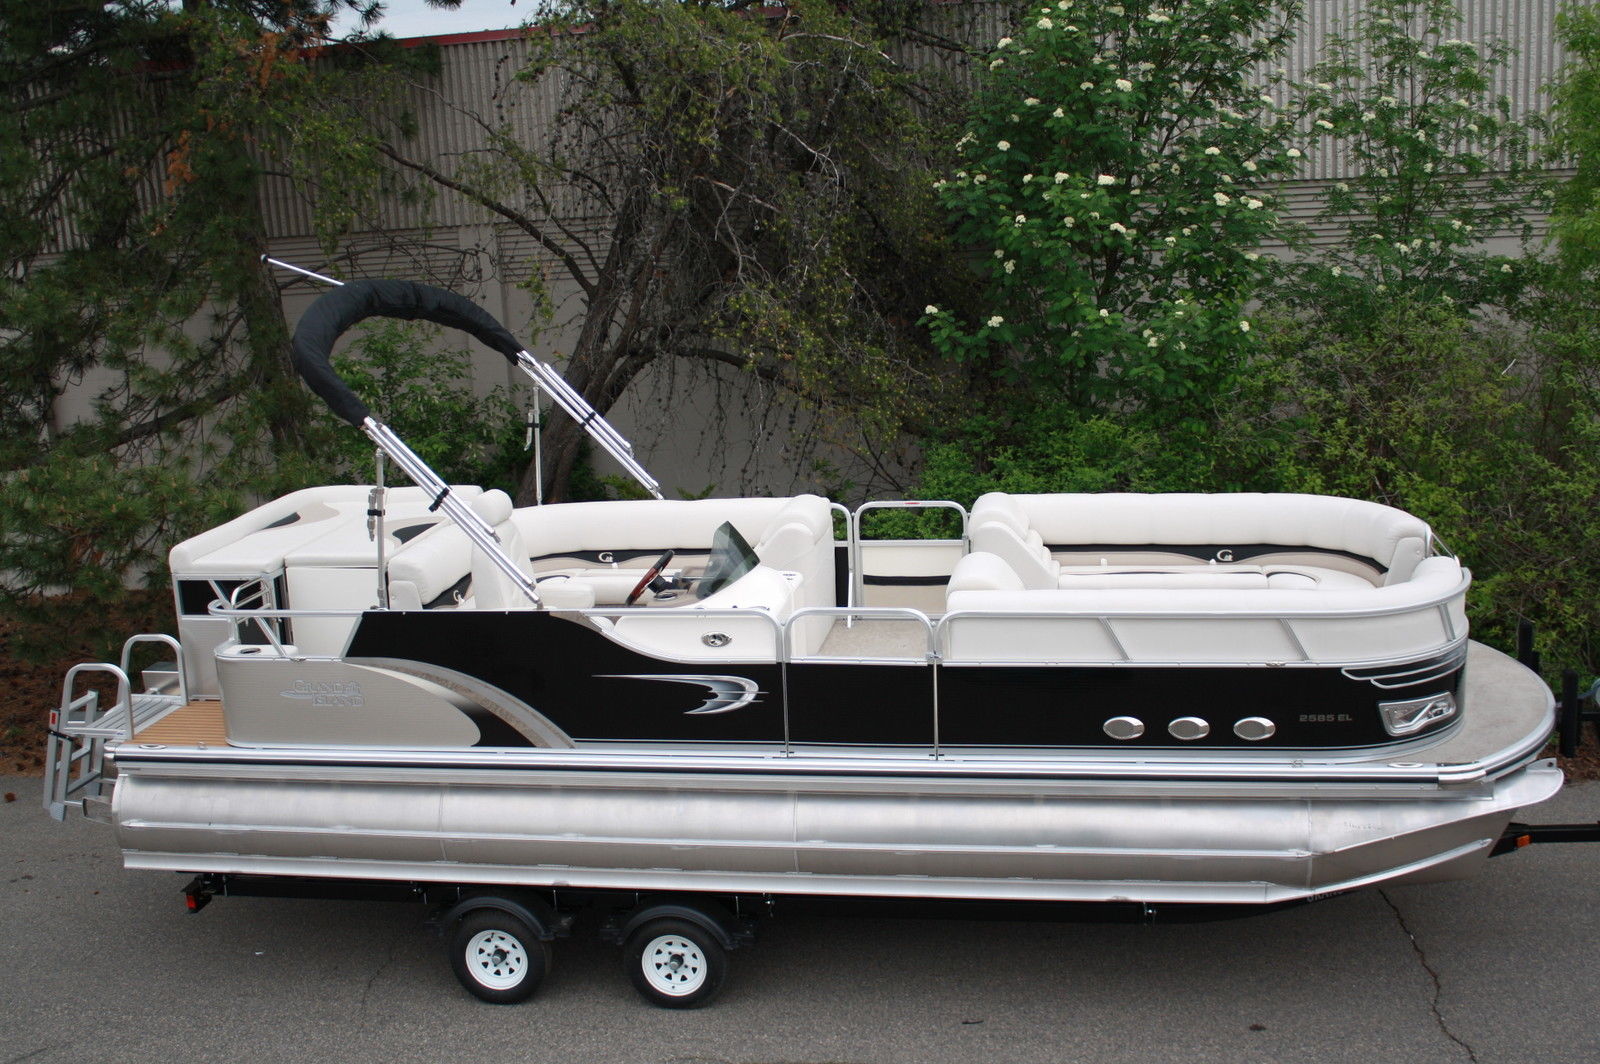 Tahoe/Grand Island 2013 for sale for $29,999 - Boats-from ...